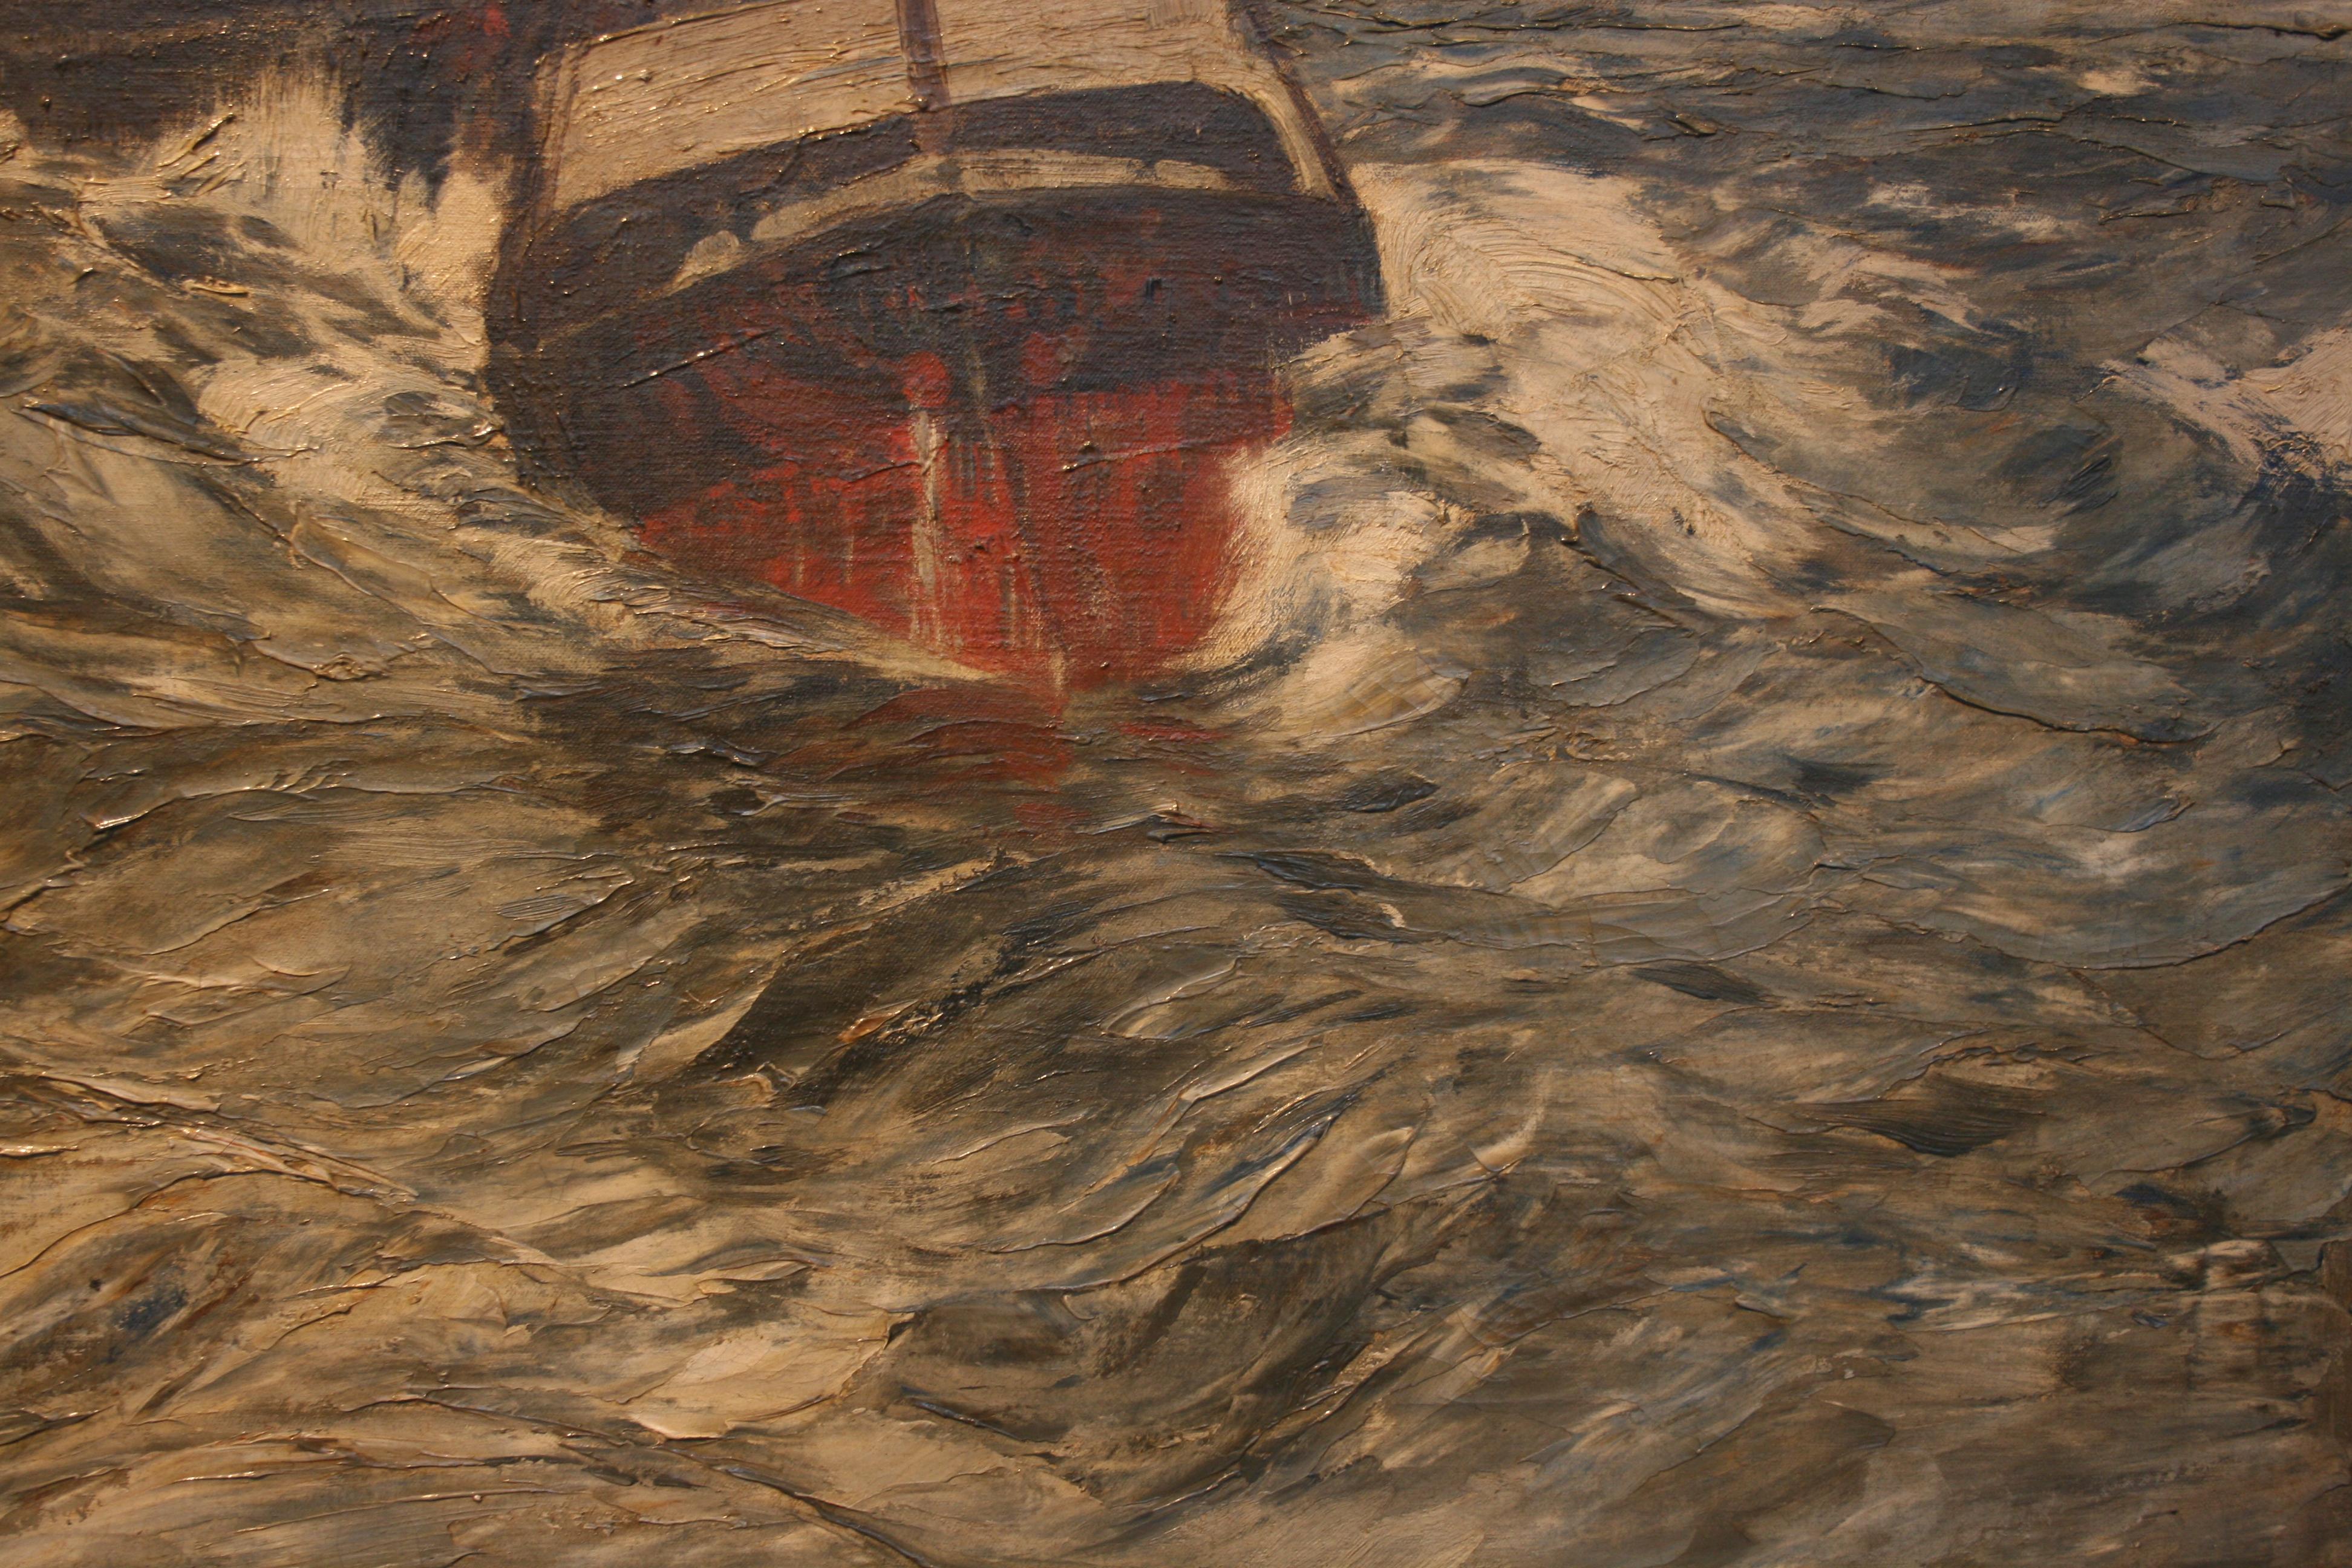 Painting Oil on Canvas, Fishing Boats On The High Seas, by Andreas Dirks 3